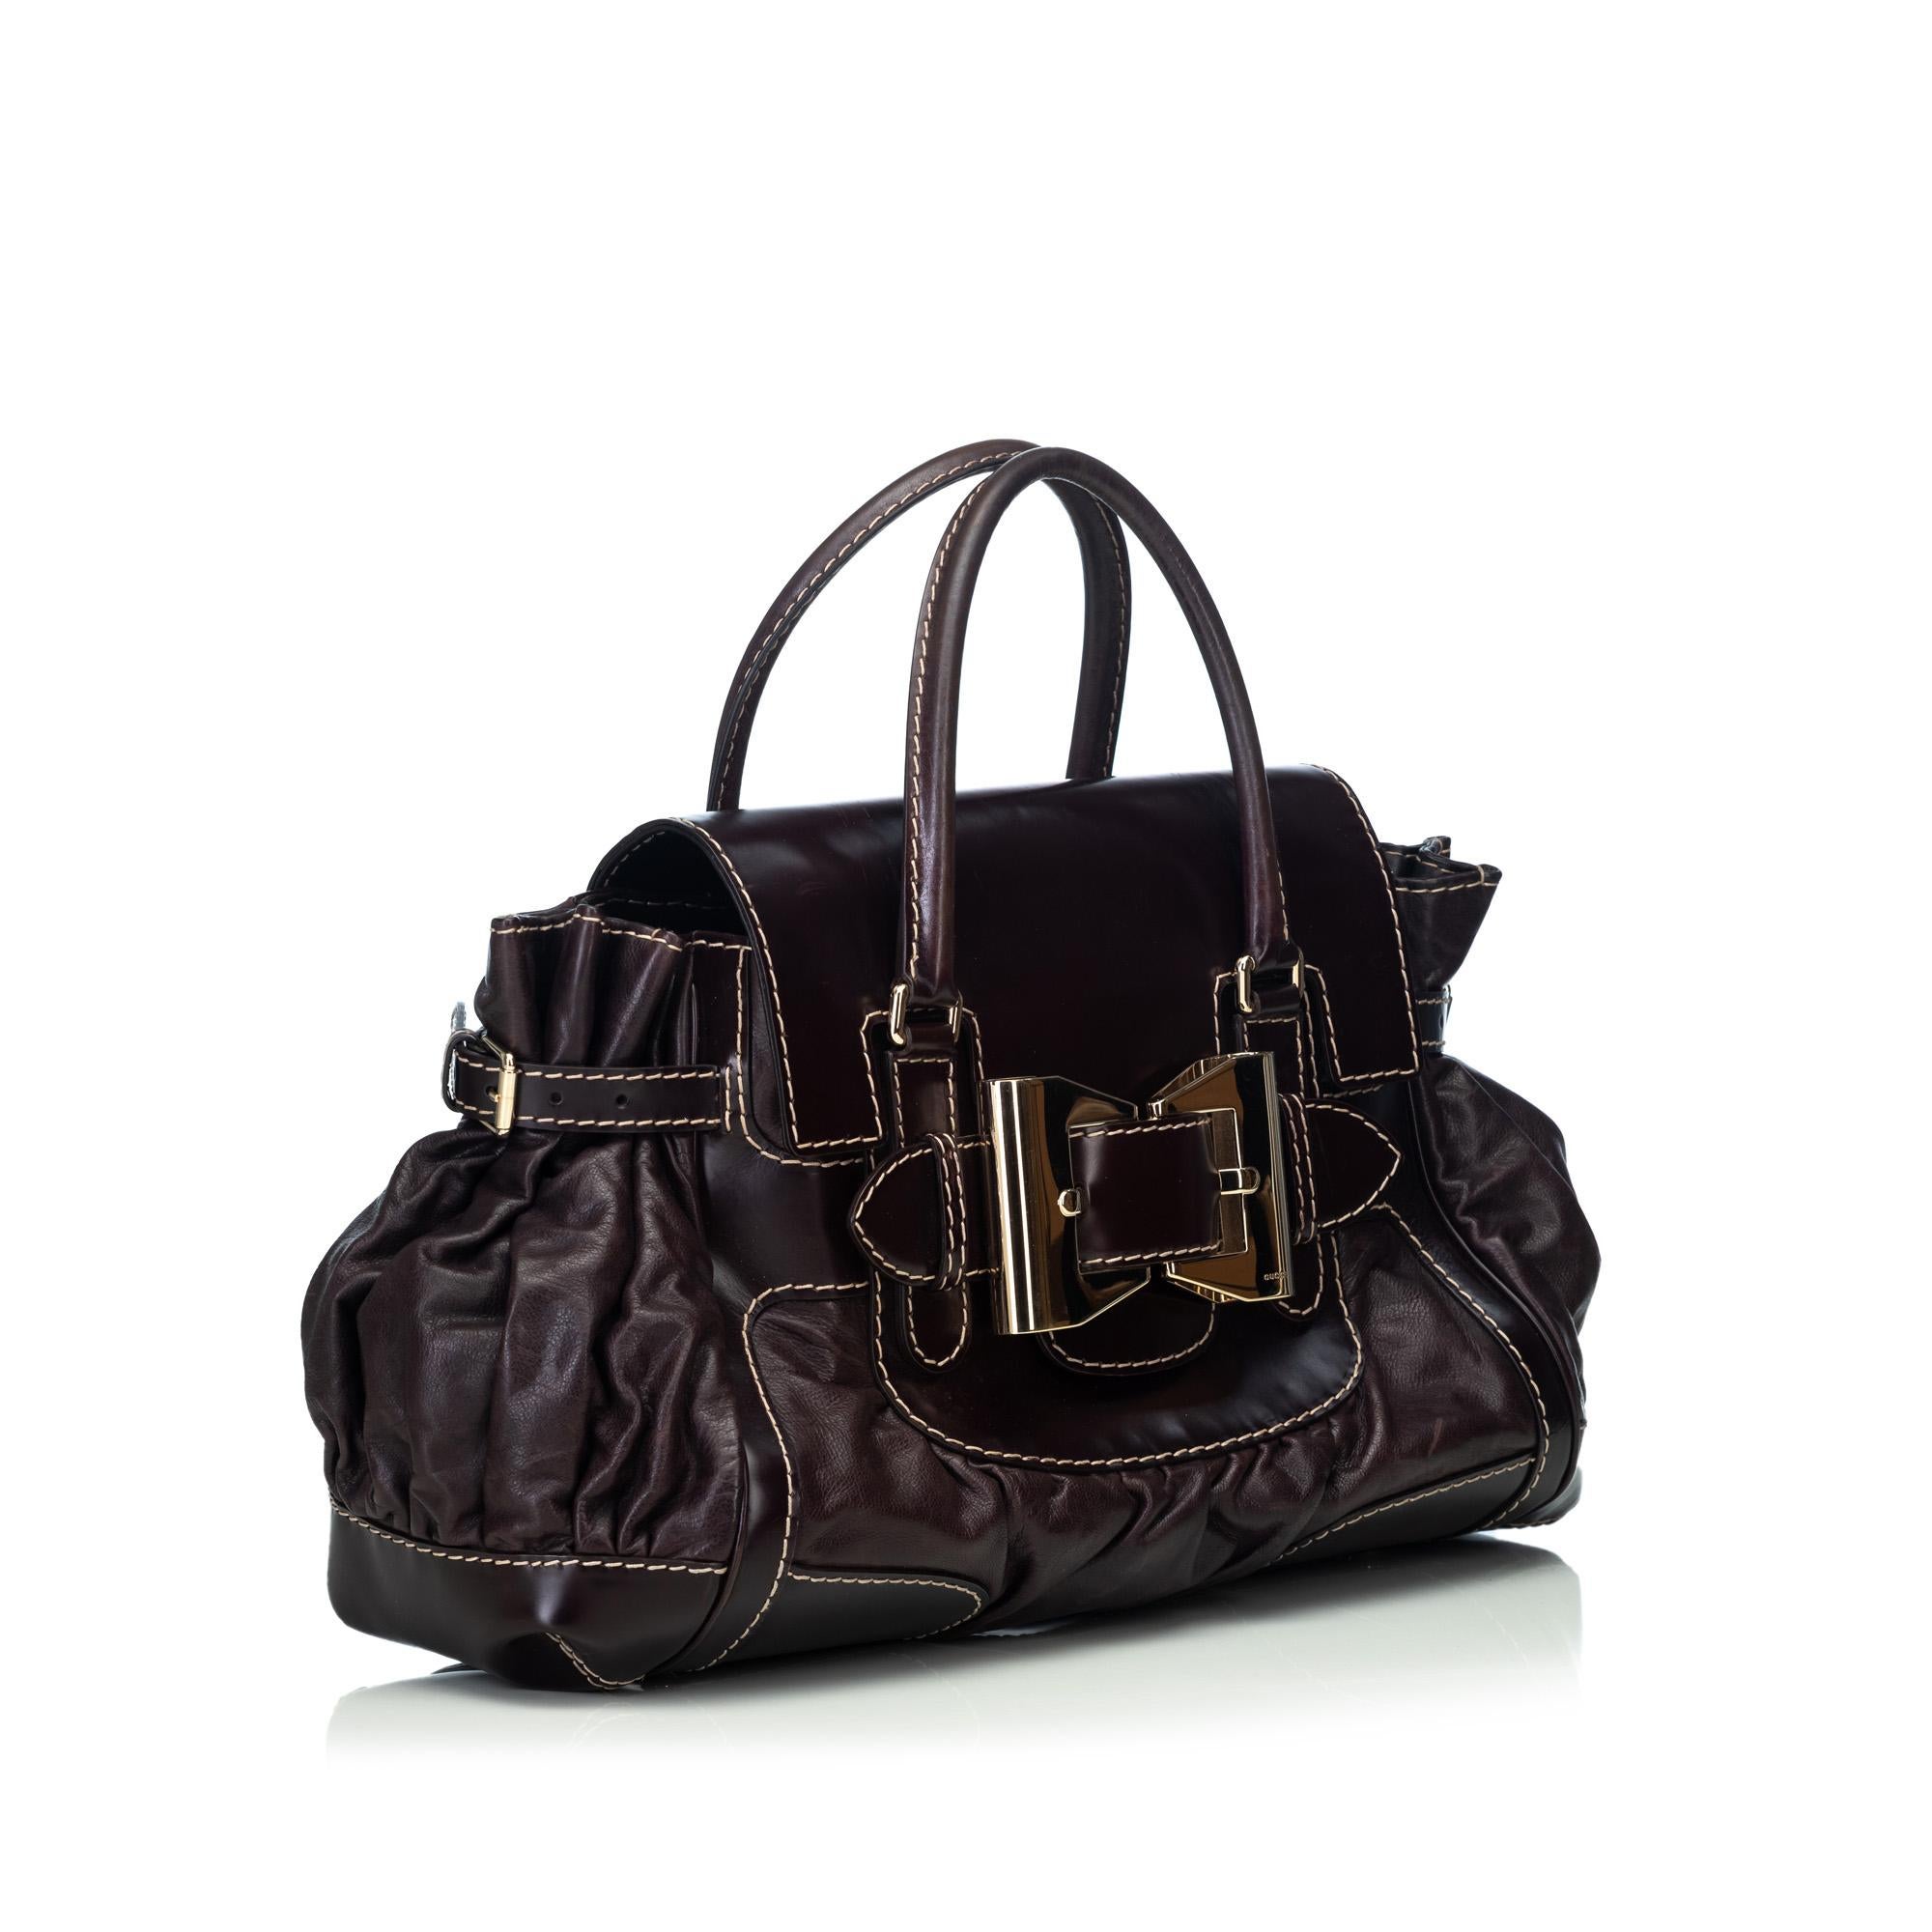 The Dialux Queen handbag features a leather body, rolled leather handles, a front flap with buckle details, an open top, and interior zip and slip pockets. It carries as B condition rating.

Inclusions: 
Dust Bag

Dimensions:
Length: 47.00 cm
Width: